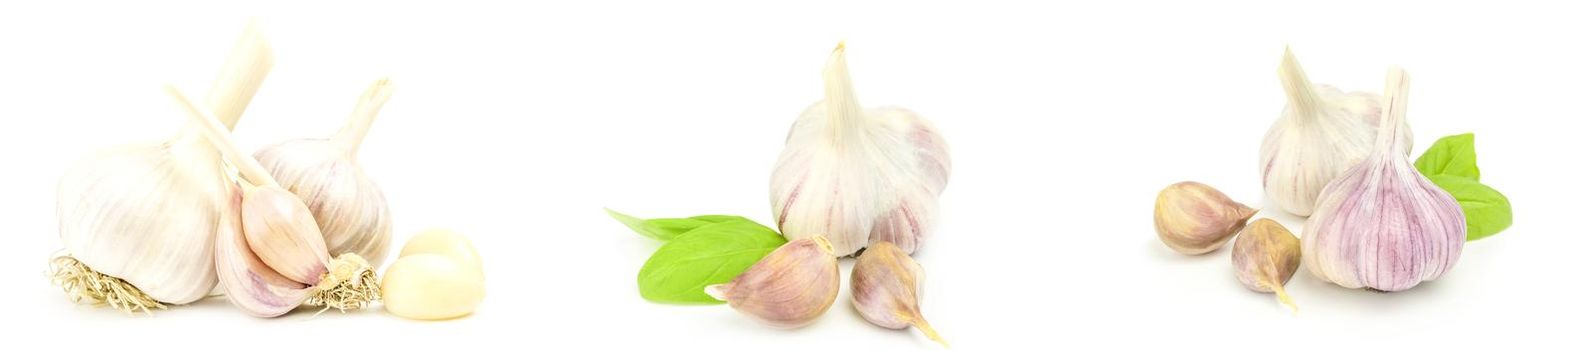 Collage of Clove garlic isolated on white